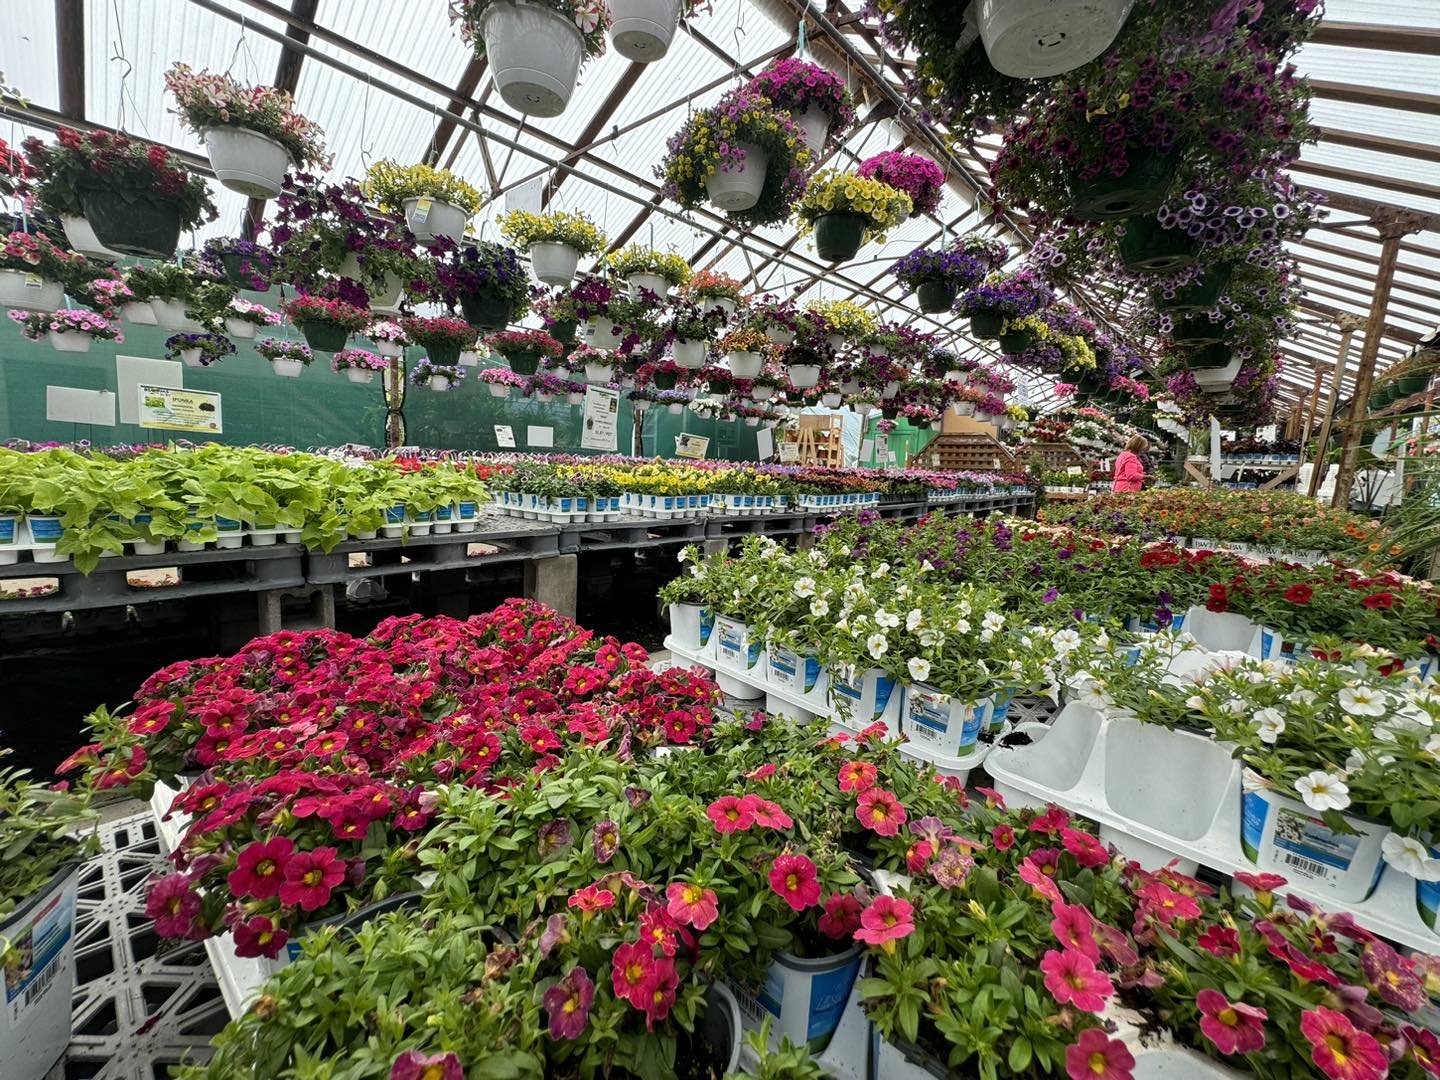 Restocked might be an&hellip;.understatement&hellip;. You name it we&rsquo;ve probably got it! 😍🌼🌿🌹🪻🌷
.
Fresh loads of hanging baskets, patio pots, bedding plants, veggies and more are in!
.
Whether you&rsquo;re just getting started or need to 